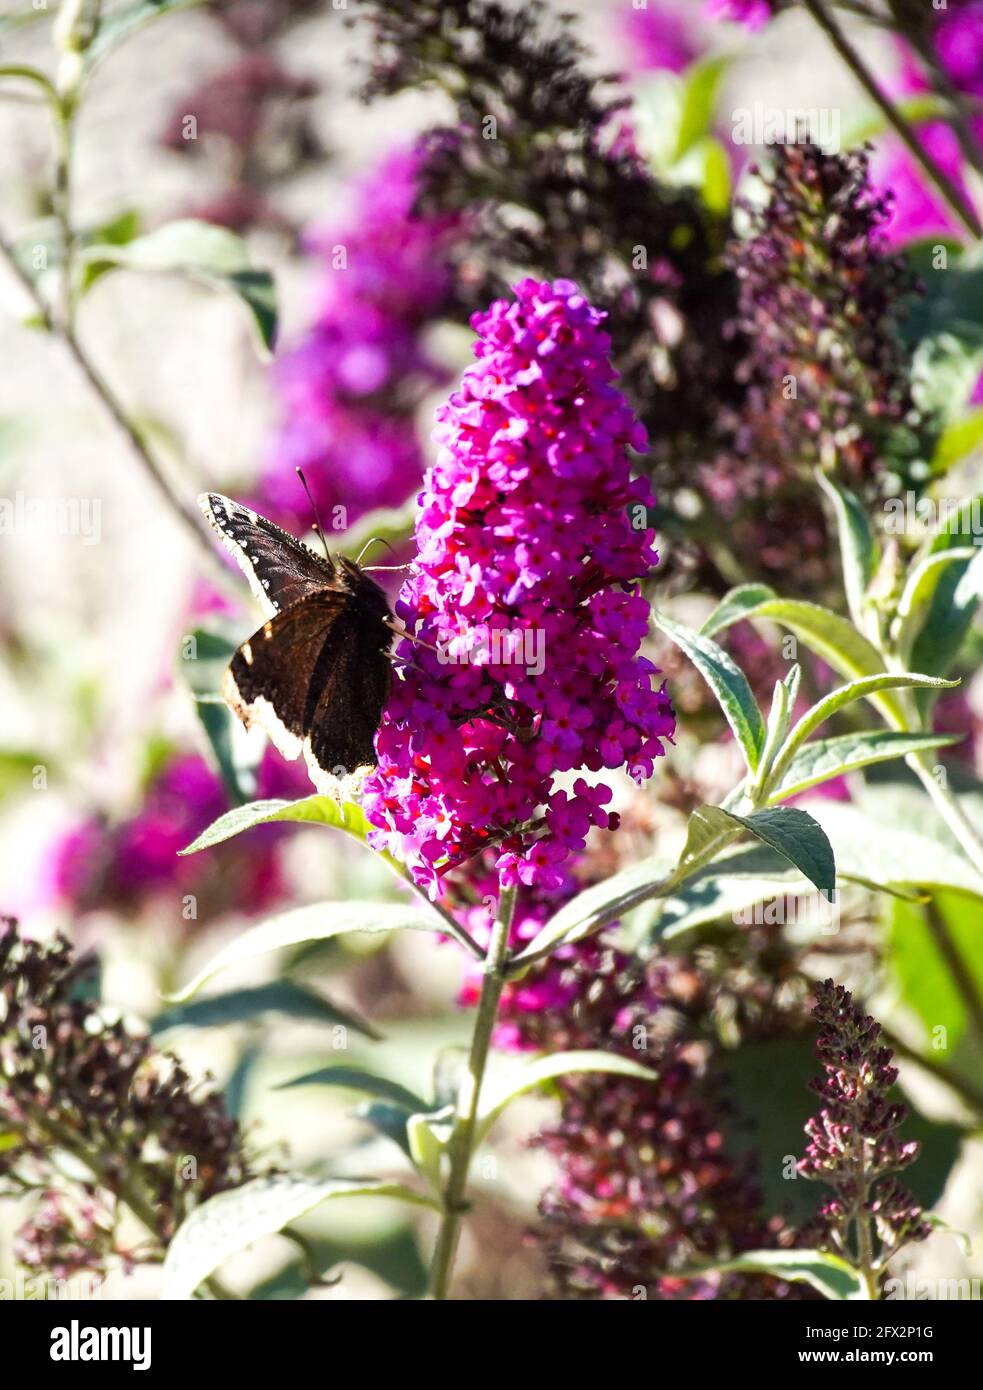 Mourning Cloak Butterfly collects pollen on a Buddleia plant in a urban garden, Los Angeles, California, May 9, 2021  Photo by Jennifer Graylock-Graylock.com 917-519-7666 Stock Photo